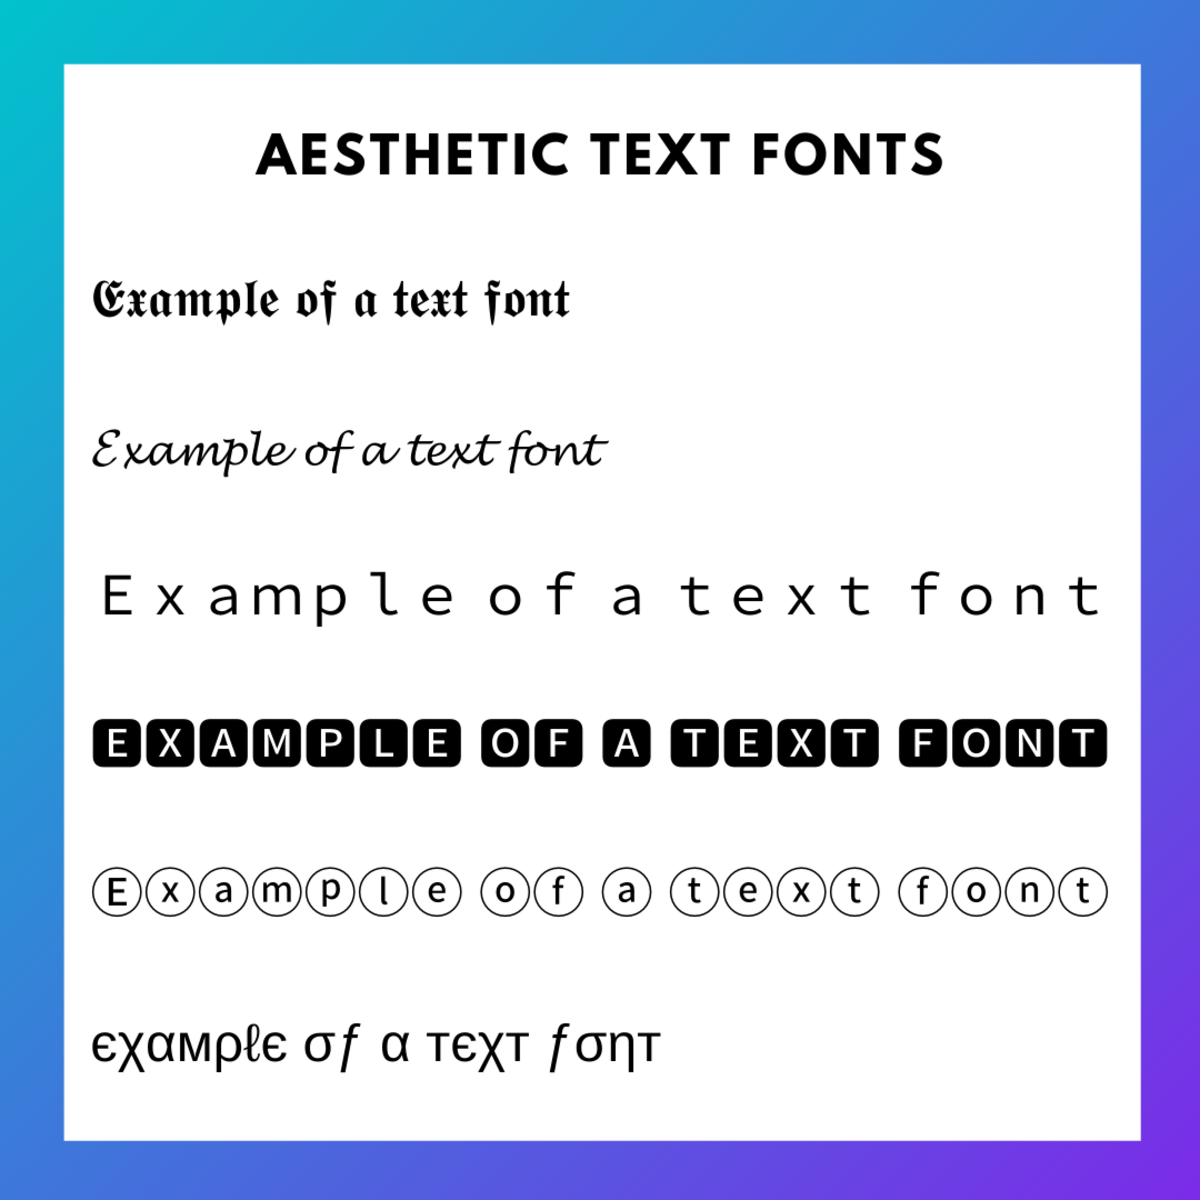 Here are some examples of aesthetic text fonts!